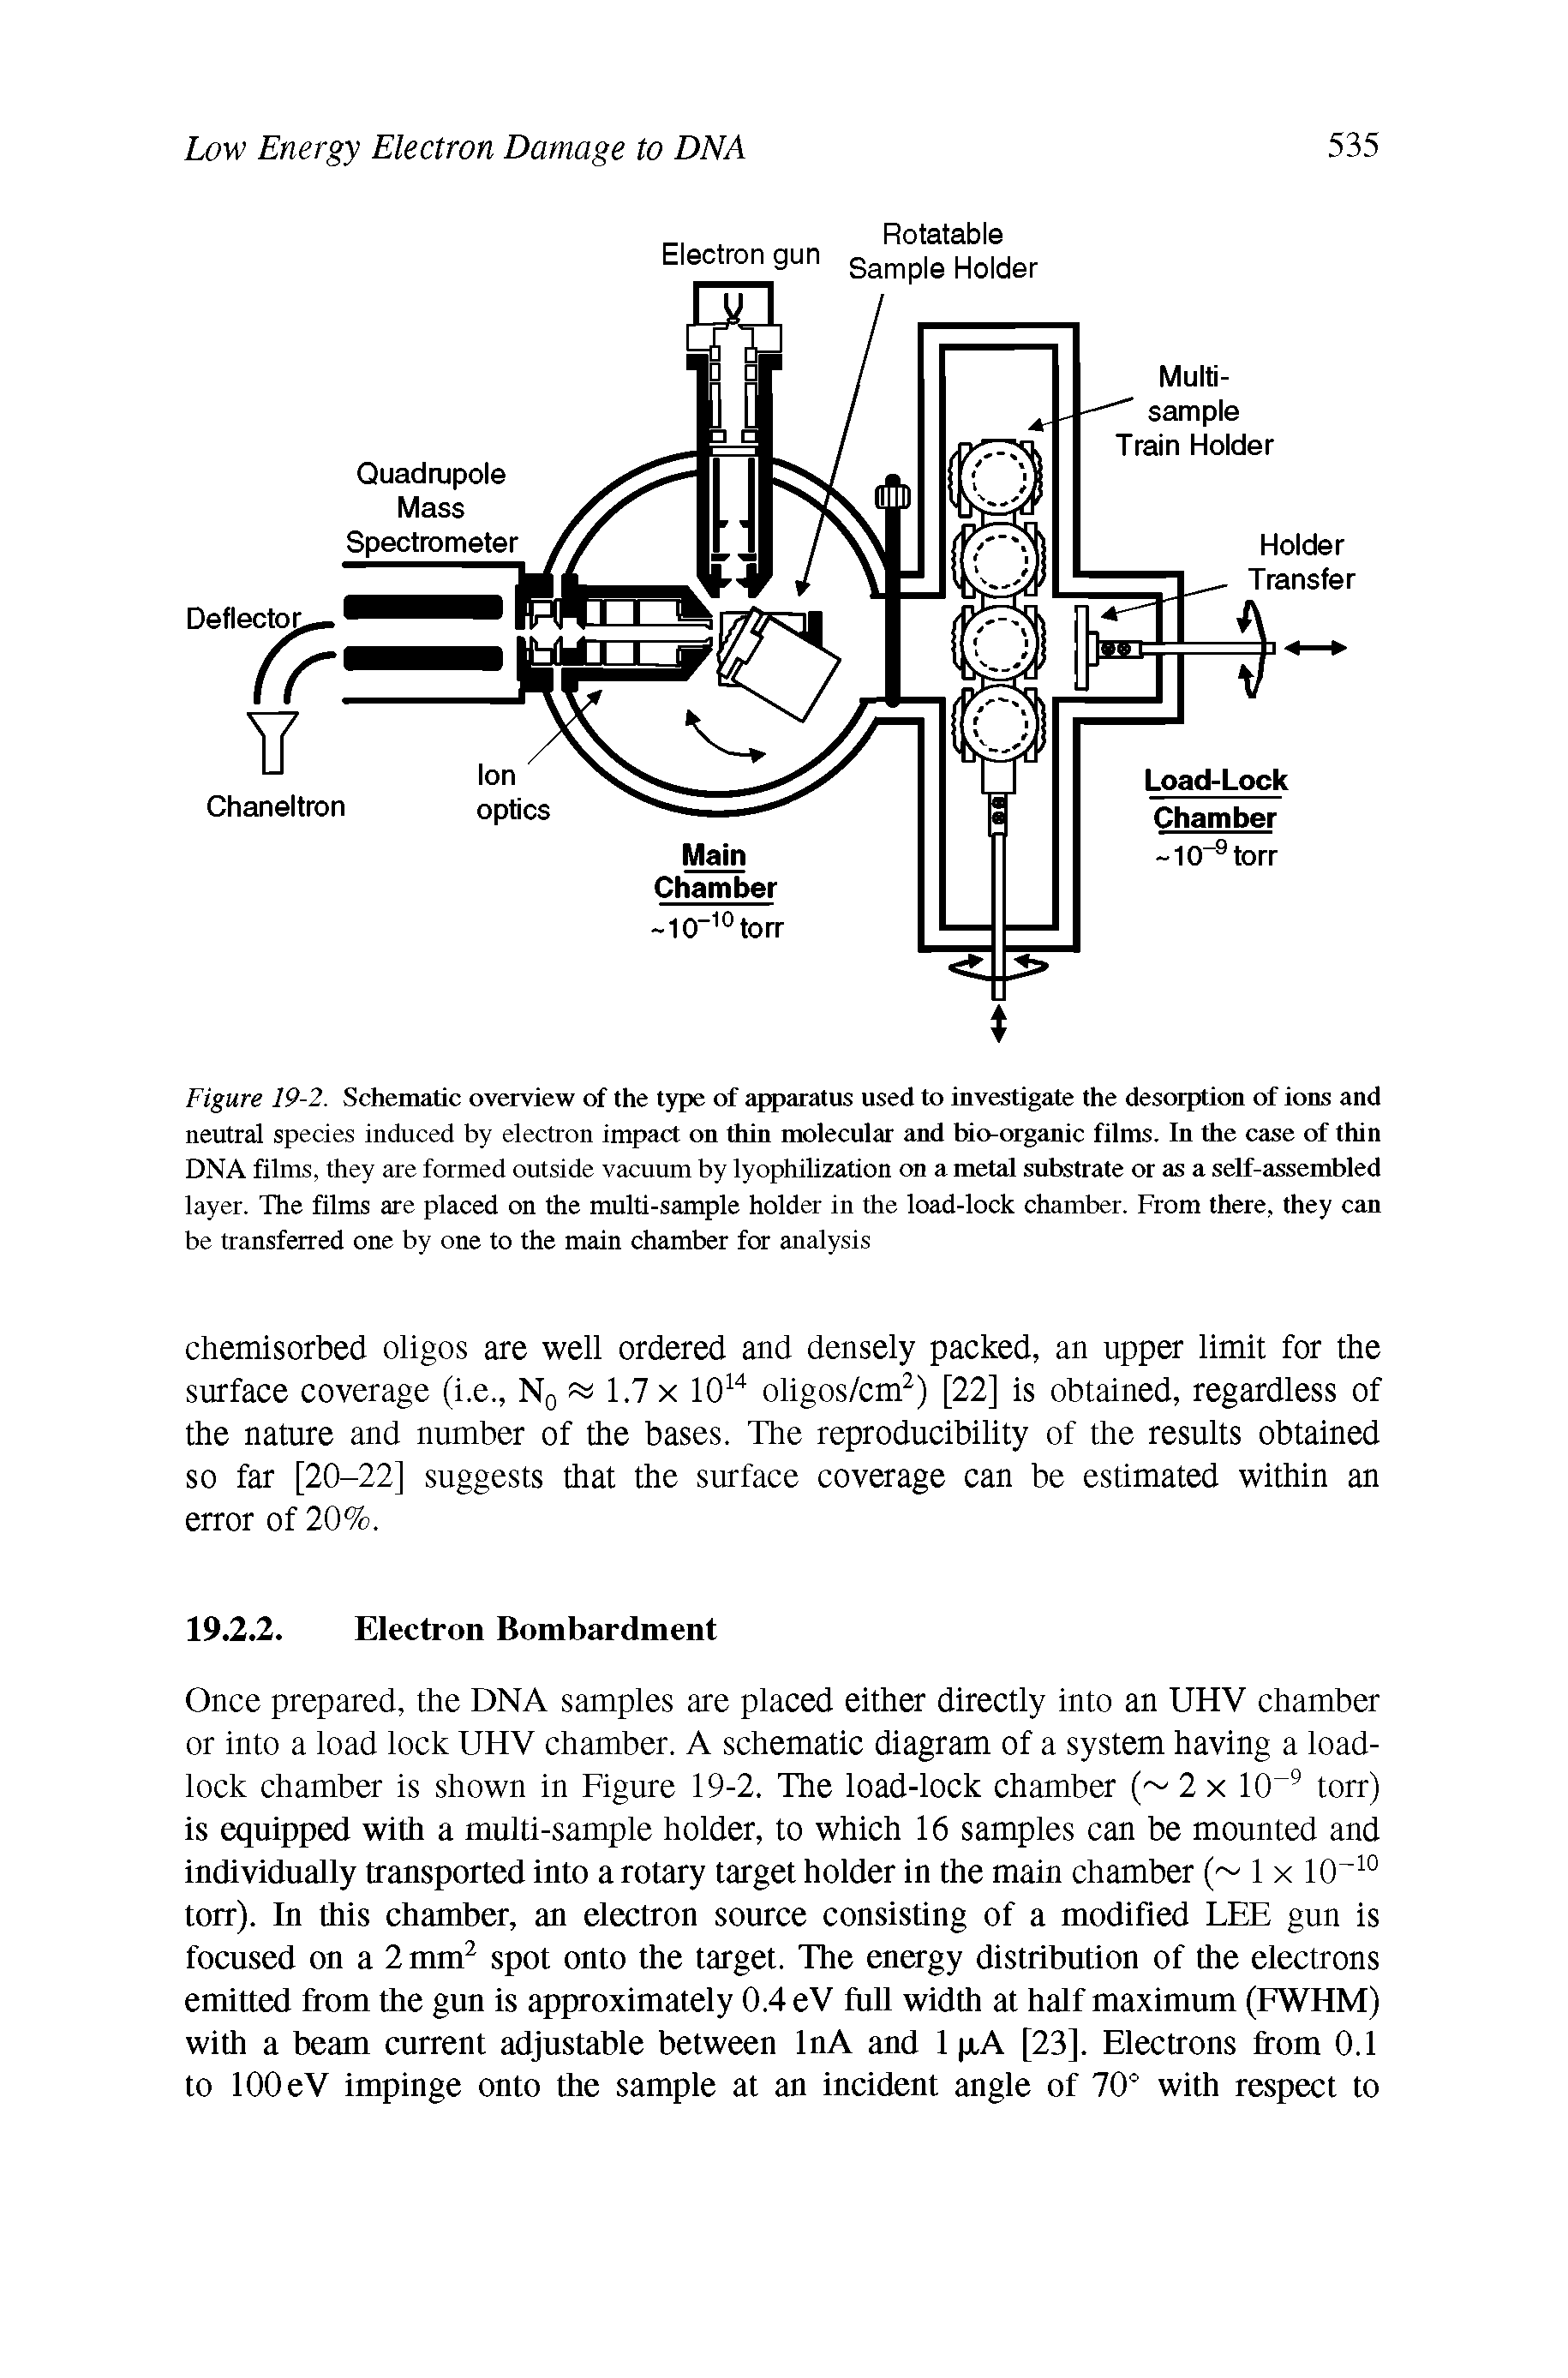 Figure 19-2. Schematic overview of the type of apparatus used to investigate the desorption of ions and neutral species induced by electron impact on thin molecular and bio-organic films. In the case of thin DNA films, they are formed outside vacuum by lyophilization on a metal substrate or as a self-assembled layer. The films are placed on the multi-sample holder in the load-lock chamber. From there, they can be transferred one by one to the main chamber for analysis...